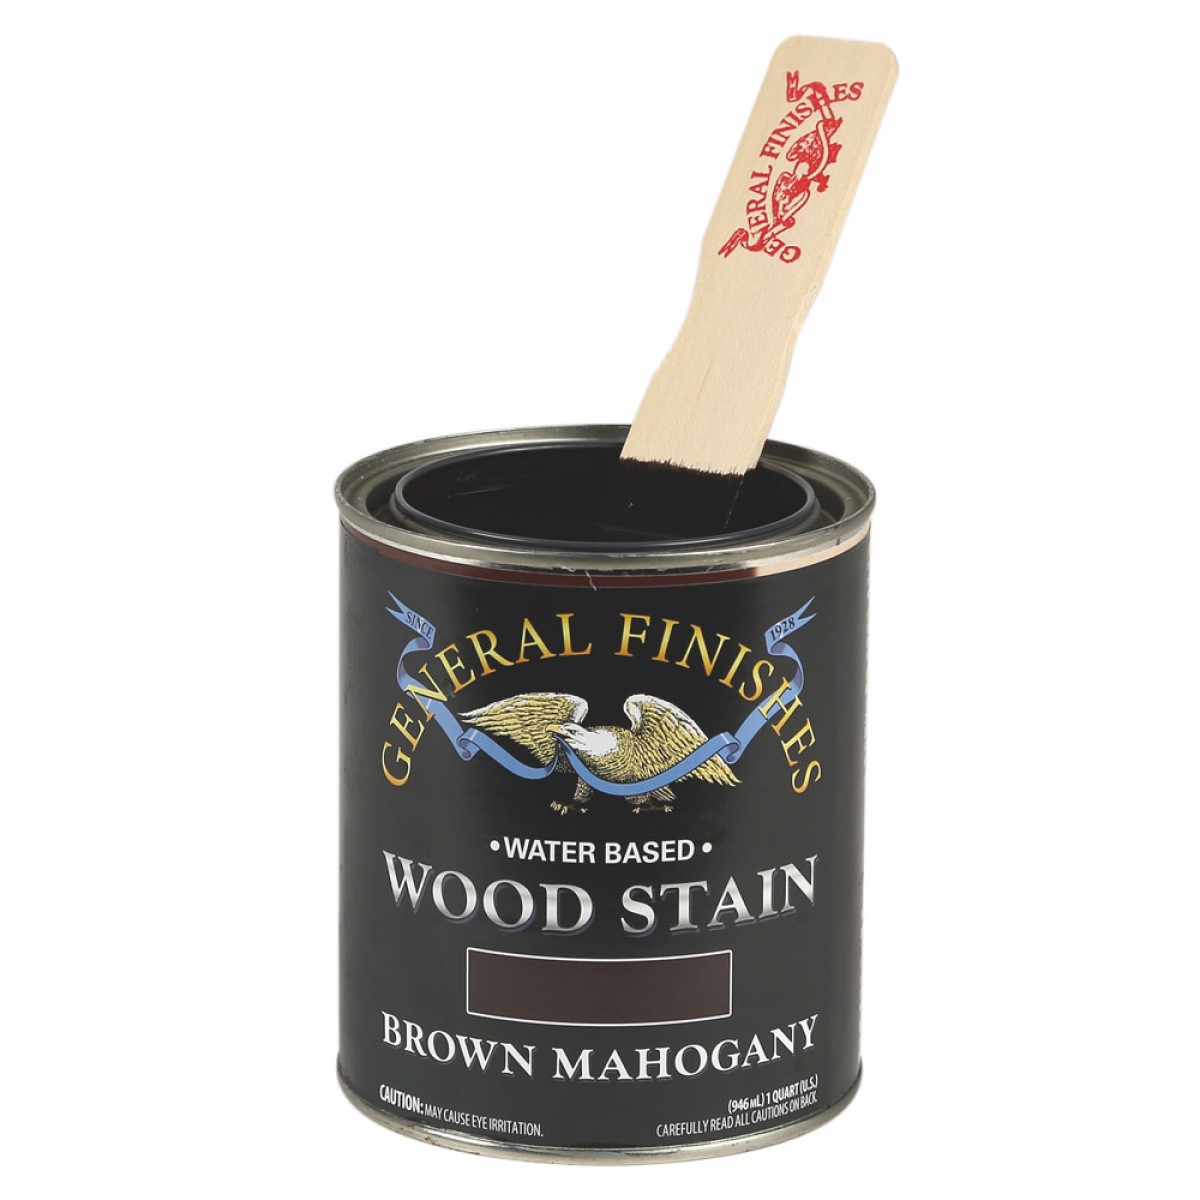 General Finishes Gel Stain, Brown Mahogany - 1 qt can